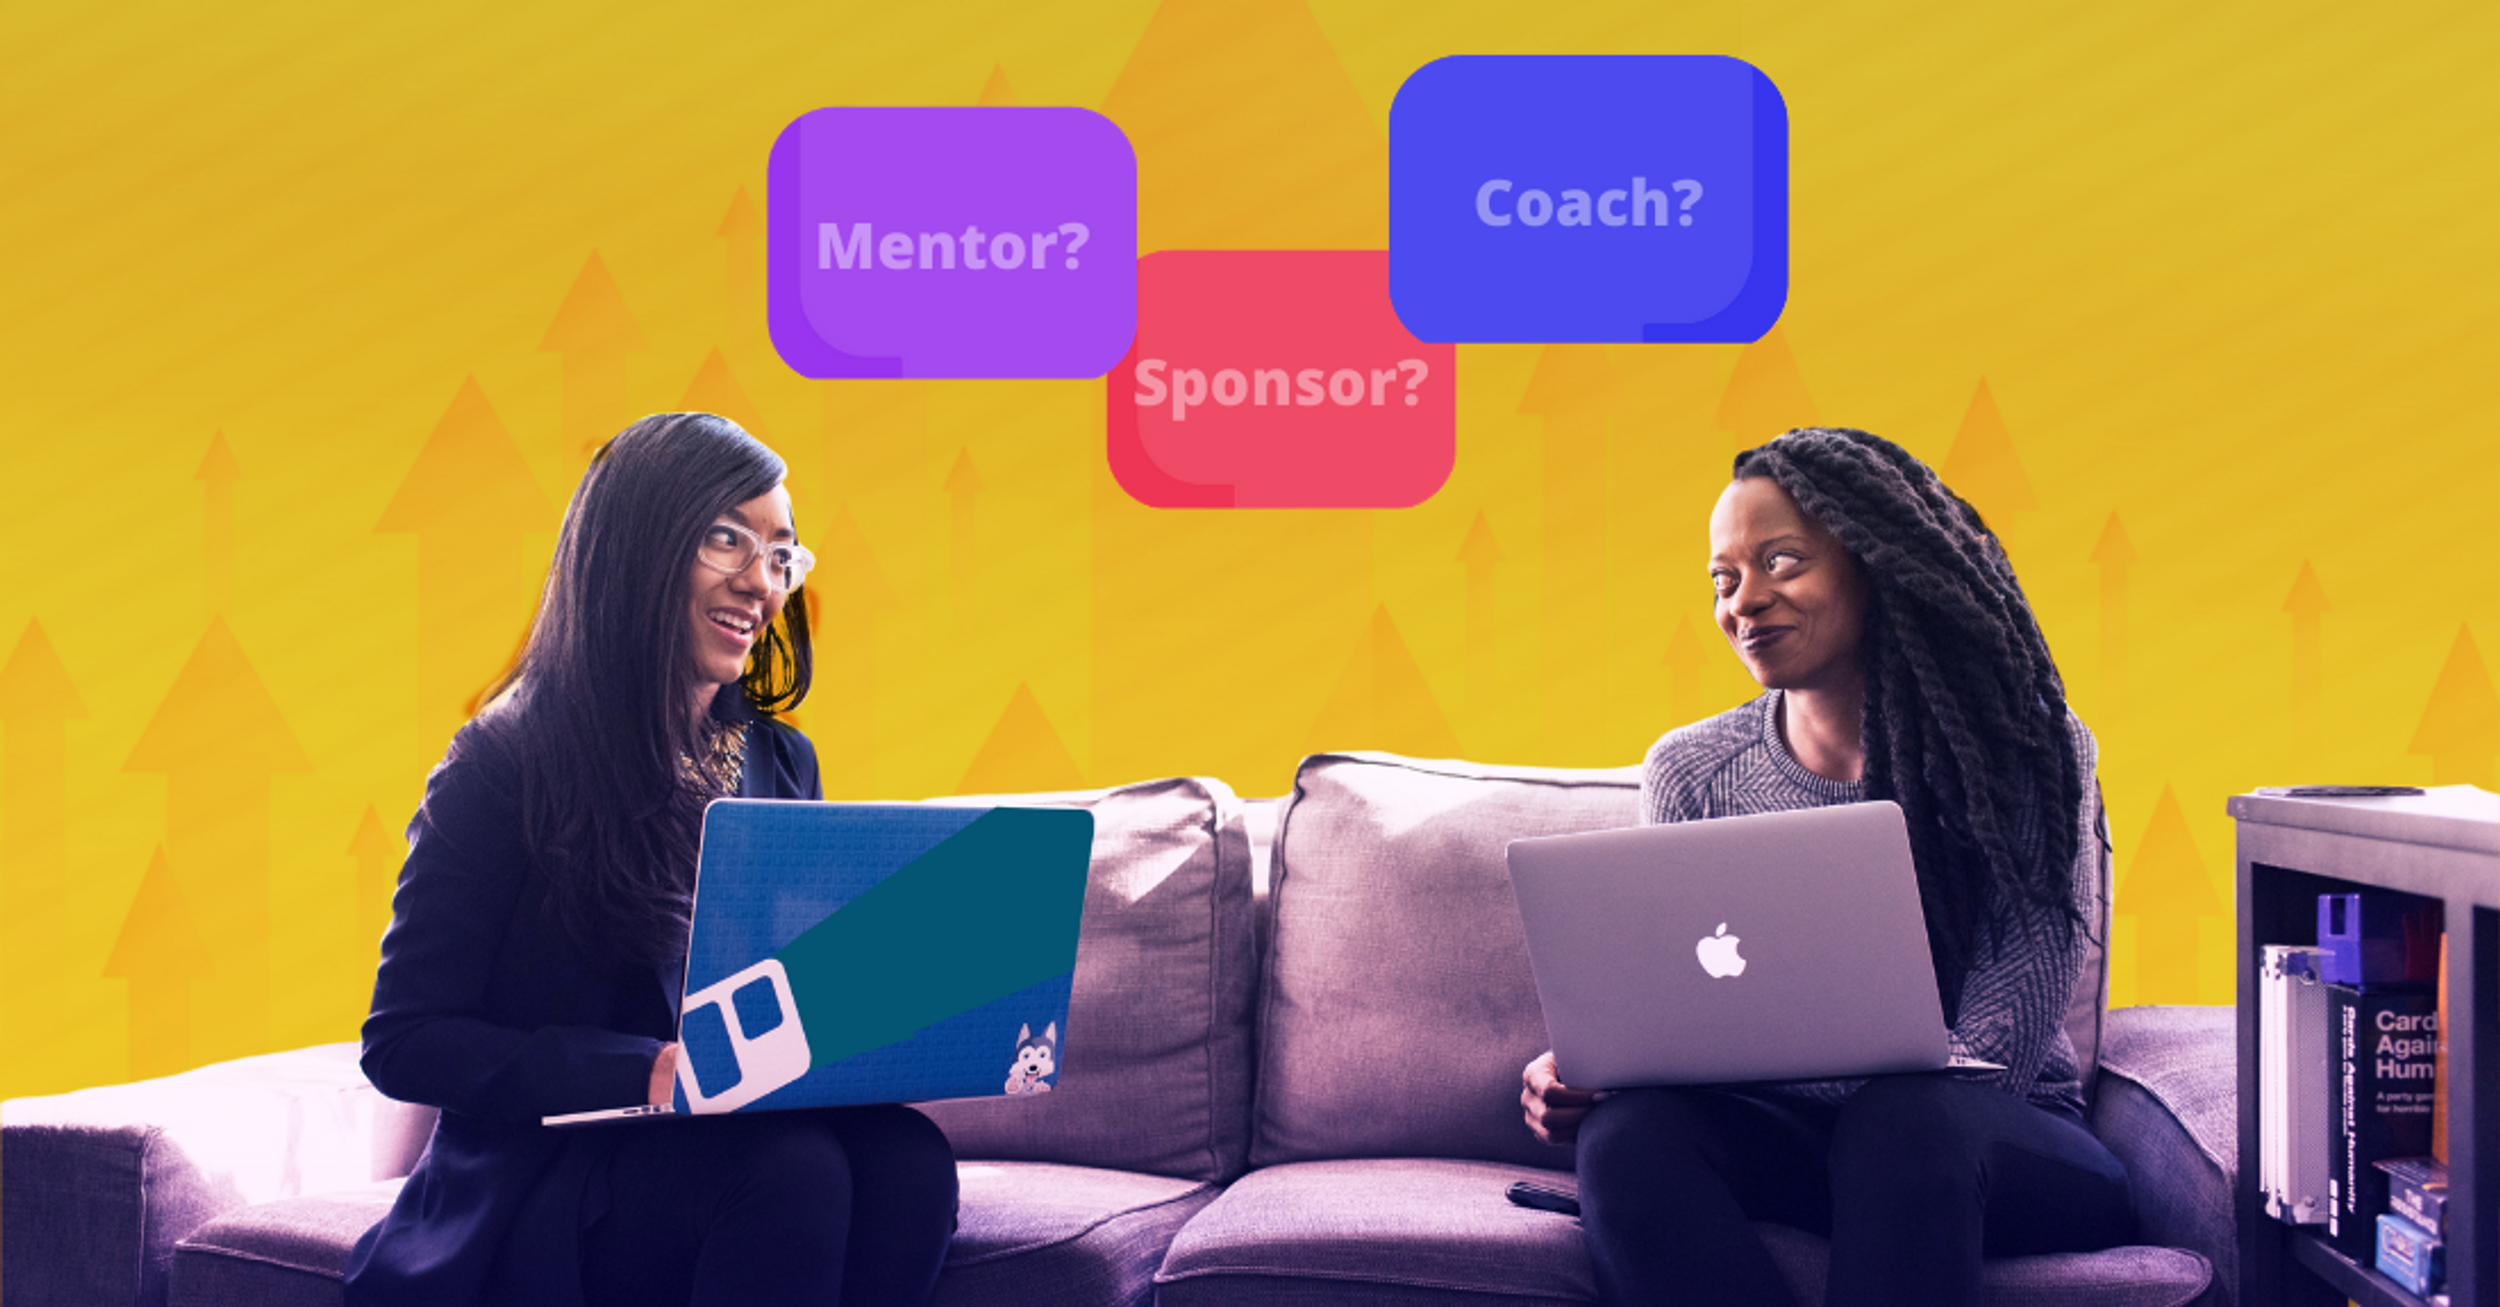 Mentor vs. Sponsor vs. Coach: What's the Difference?